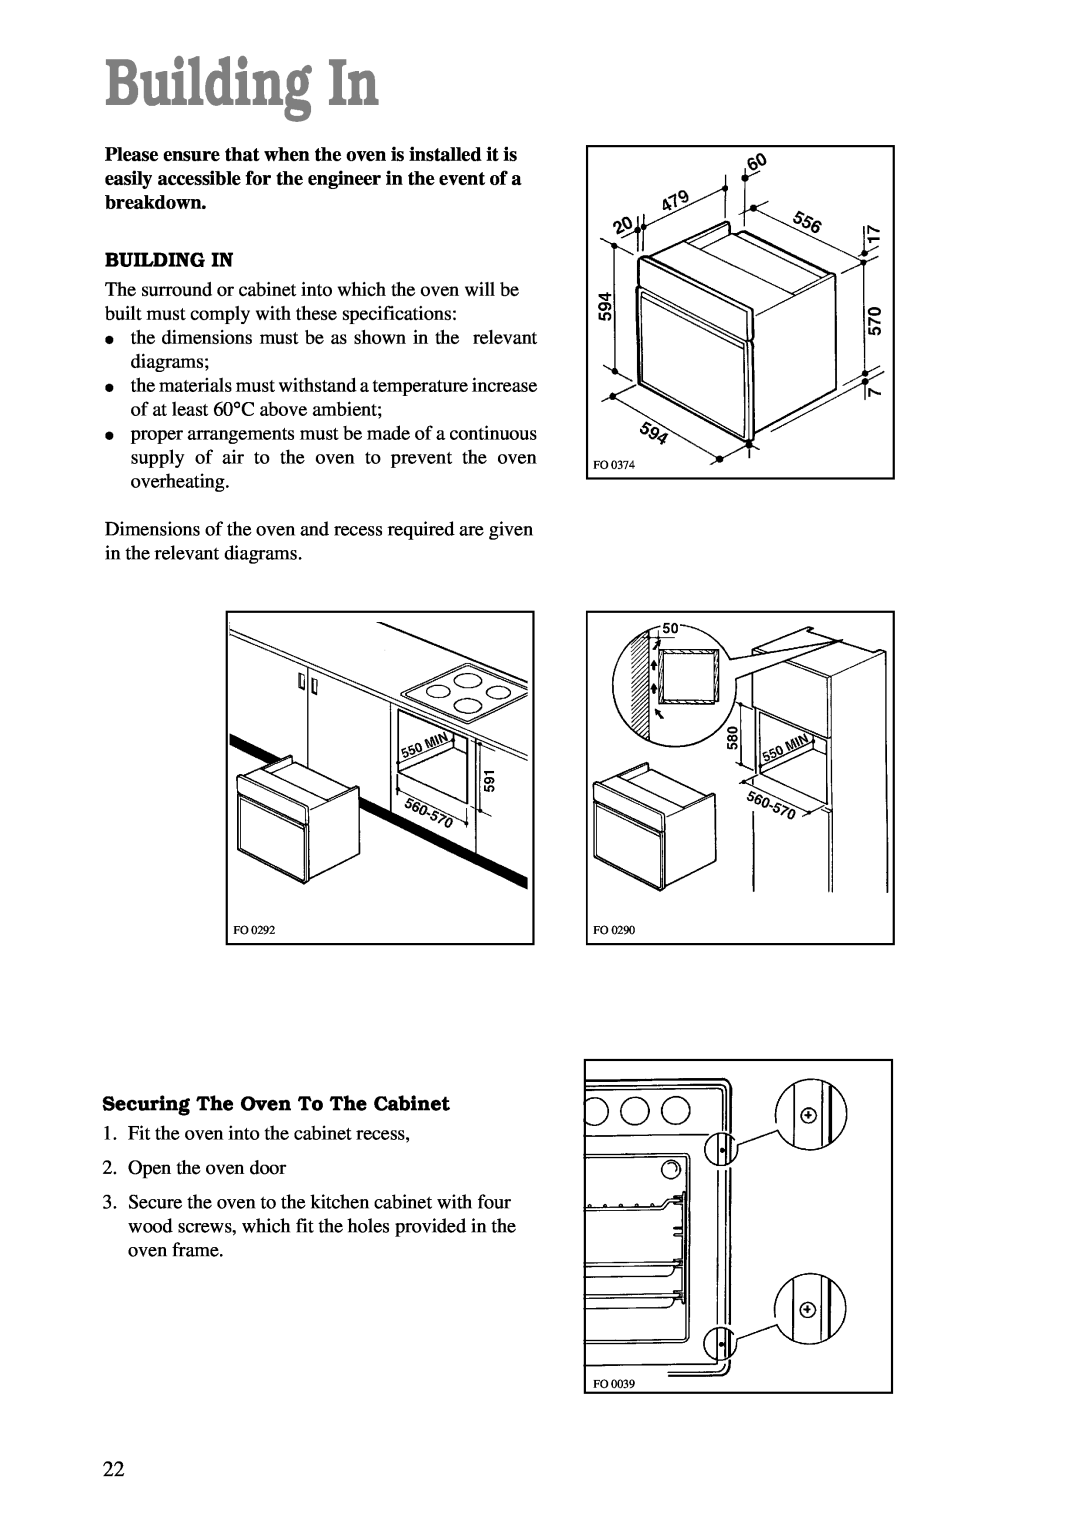 Tricity Bendix TBS 603 manual Building In, Securing The Oven To The Cabinet 